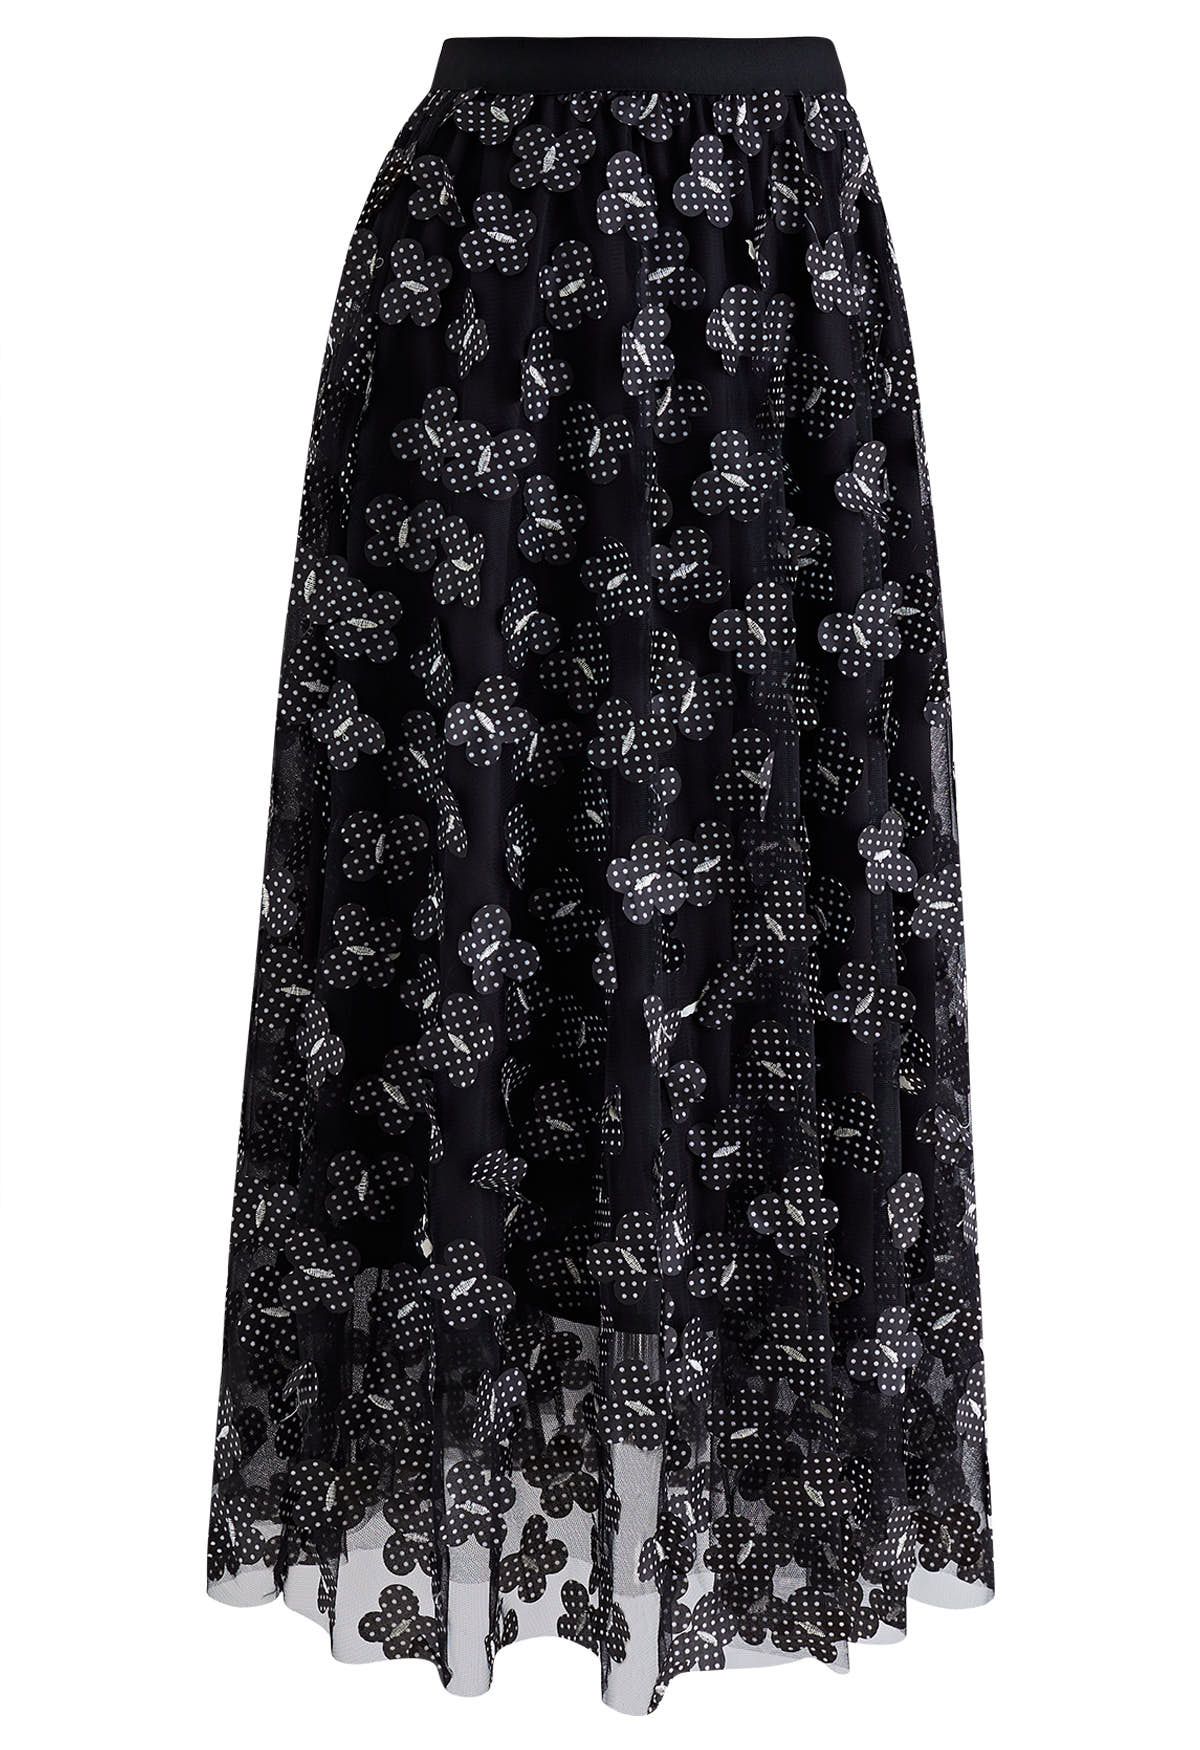 3D Dotted Butterfly Double-Layered Mesh Skirt in Black